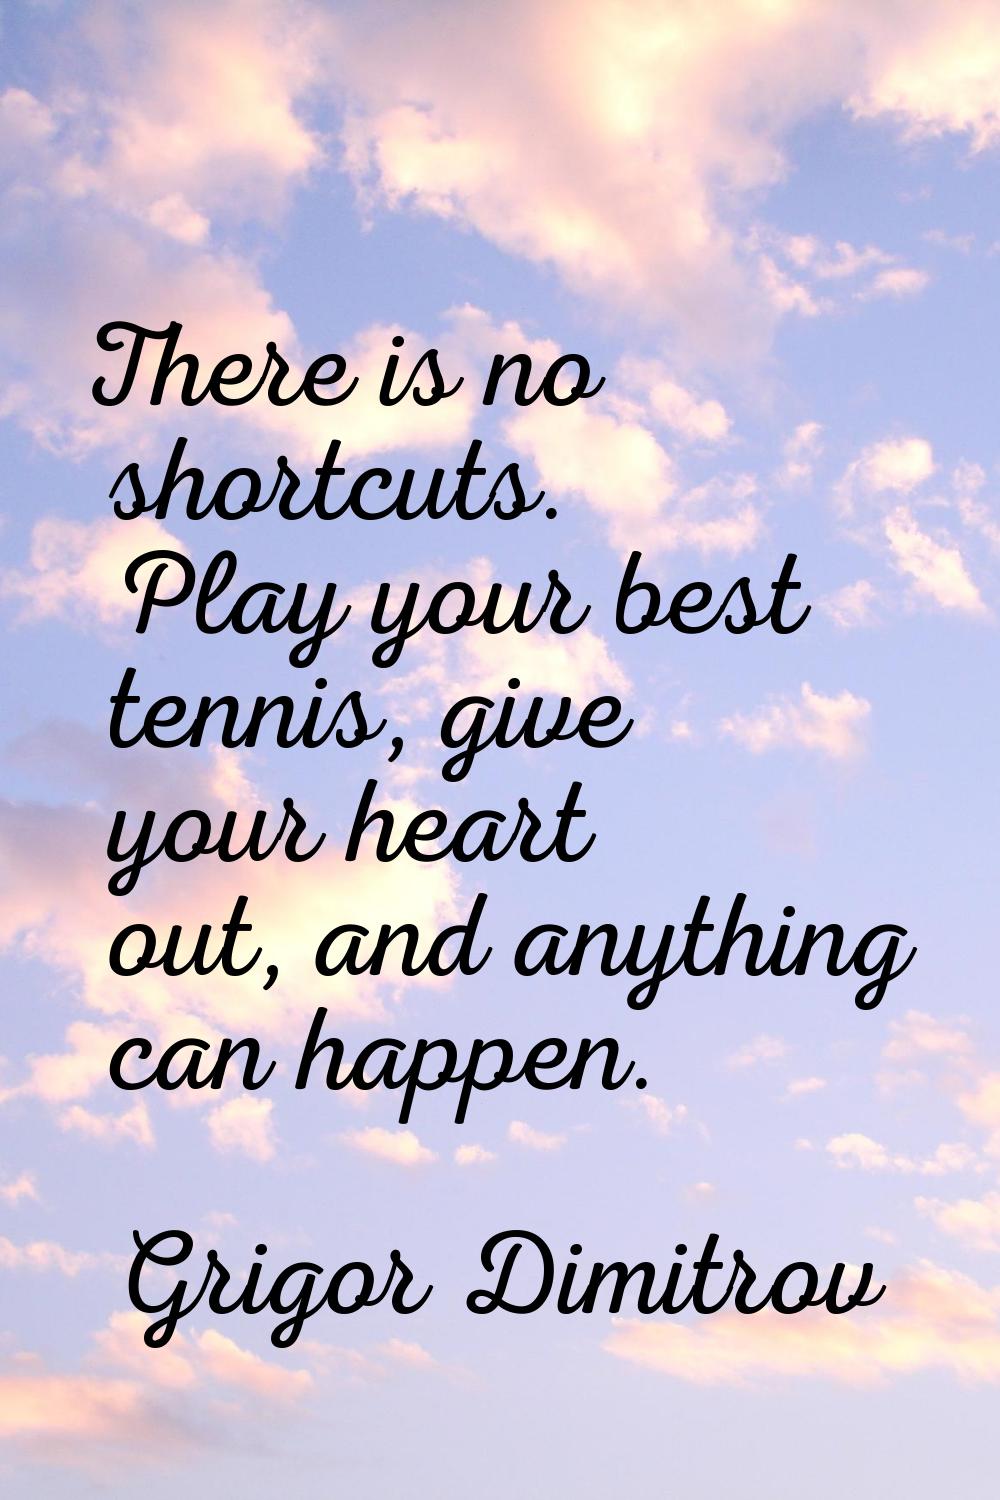 There is no shortcuts. Play your best tennis, give your heart out, and anything can happen.